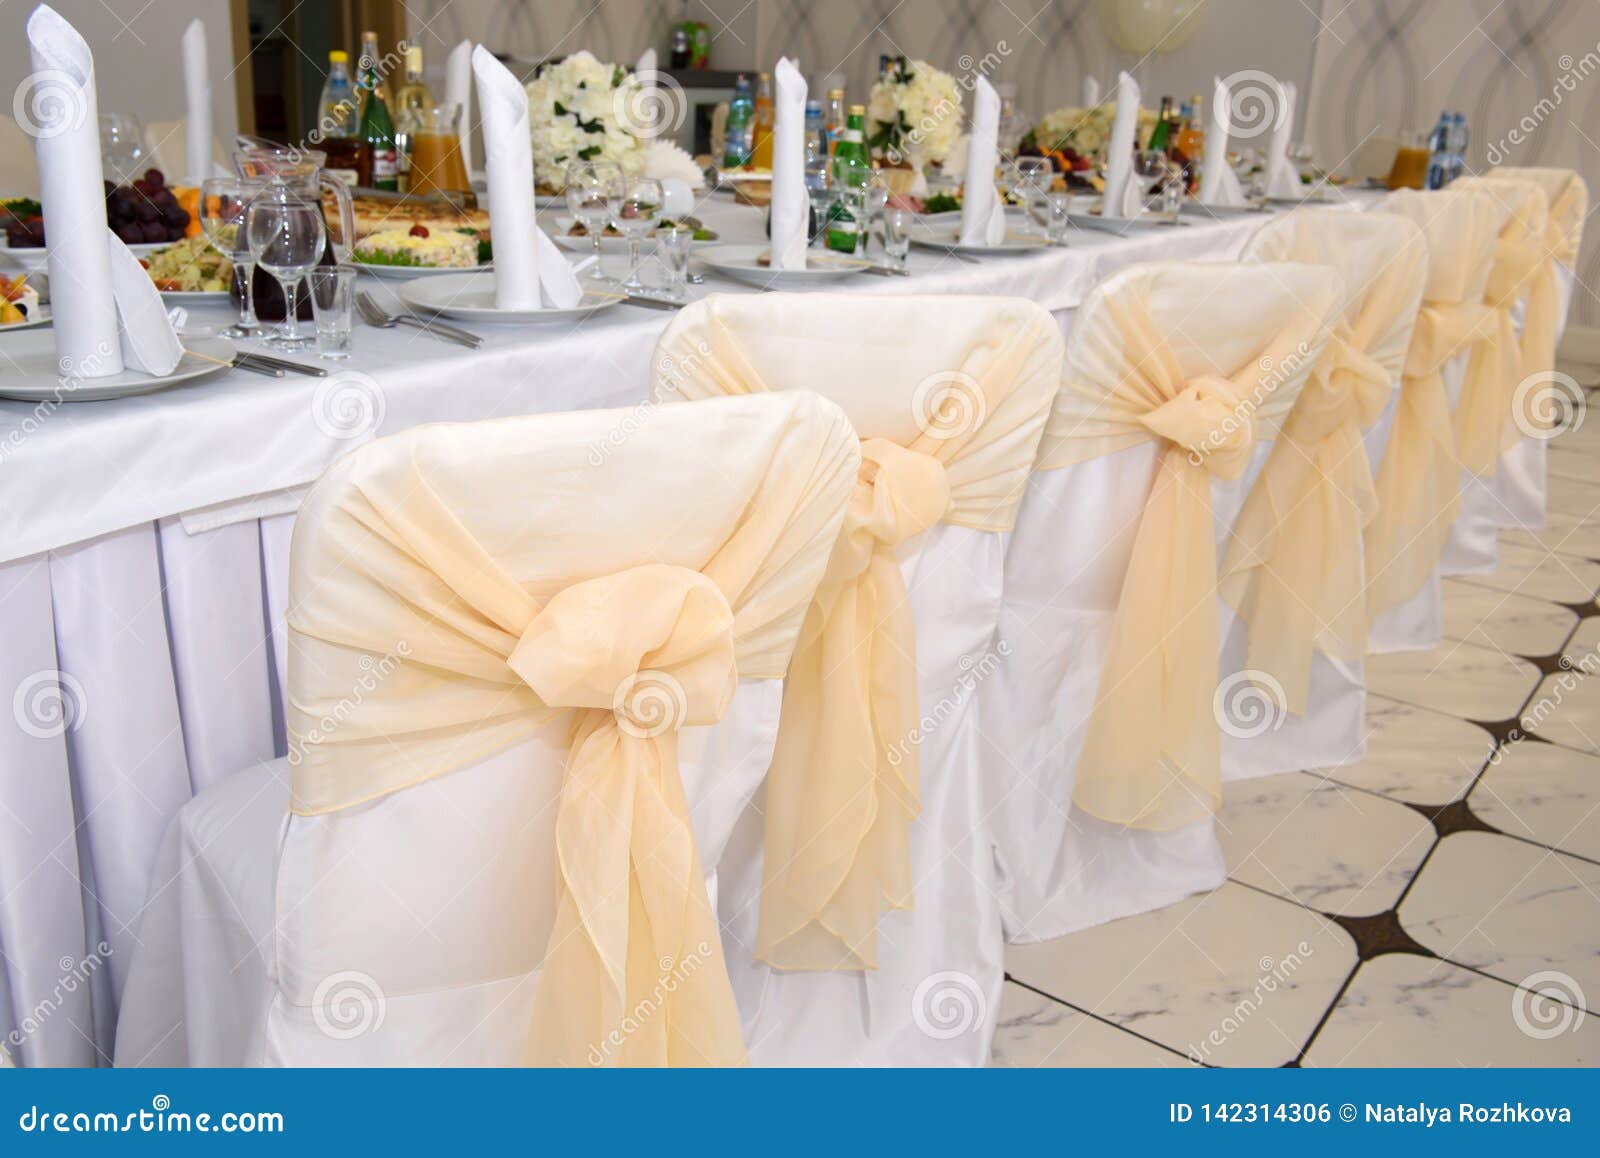 Wedding Bows On The Chairs Of The Banquet Hall Stock Photo Image